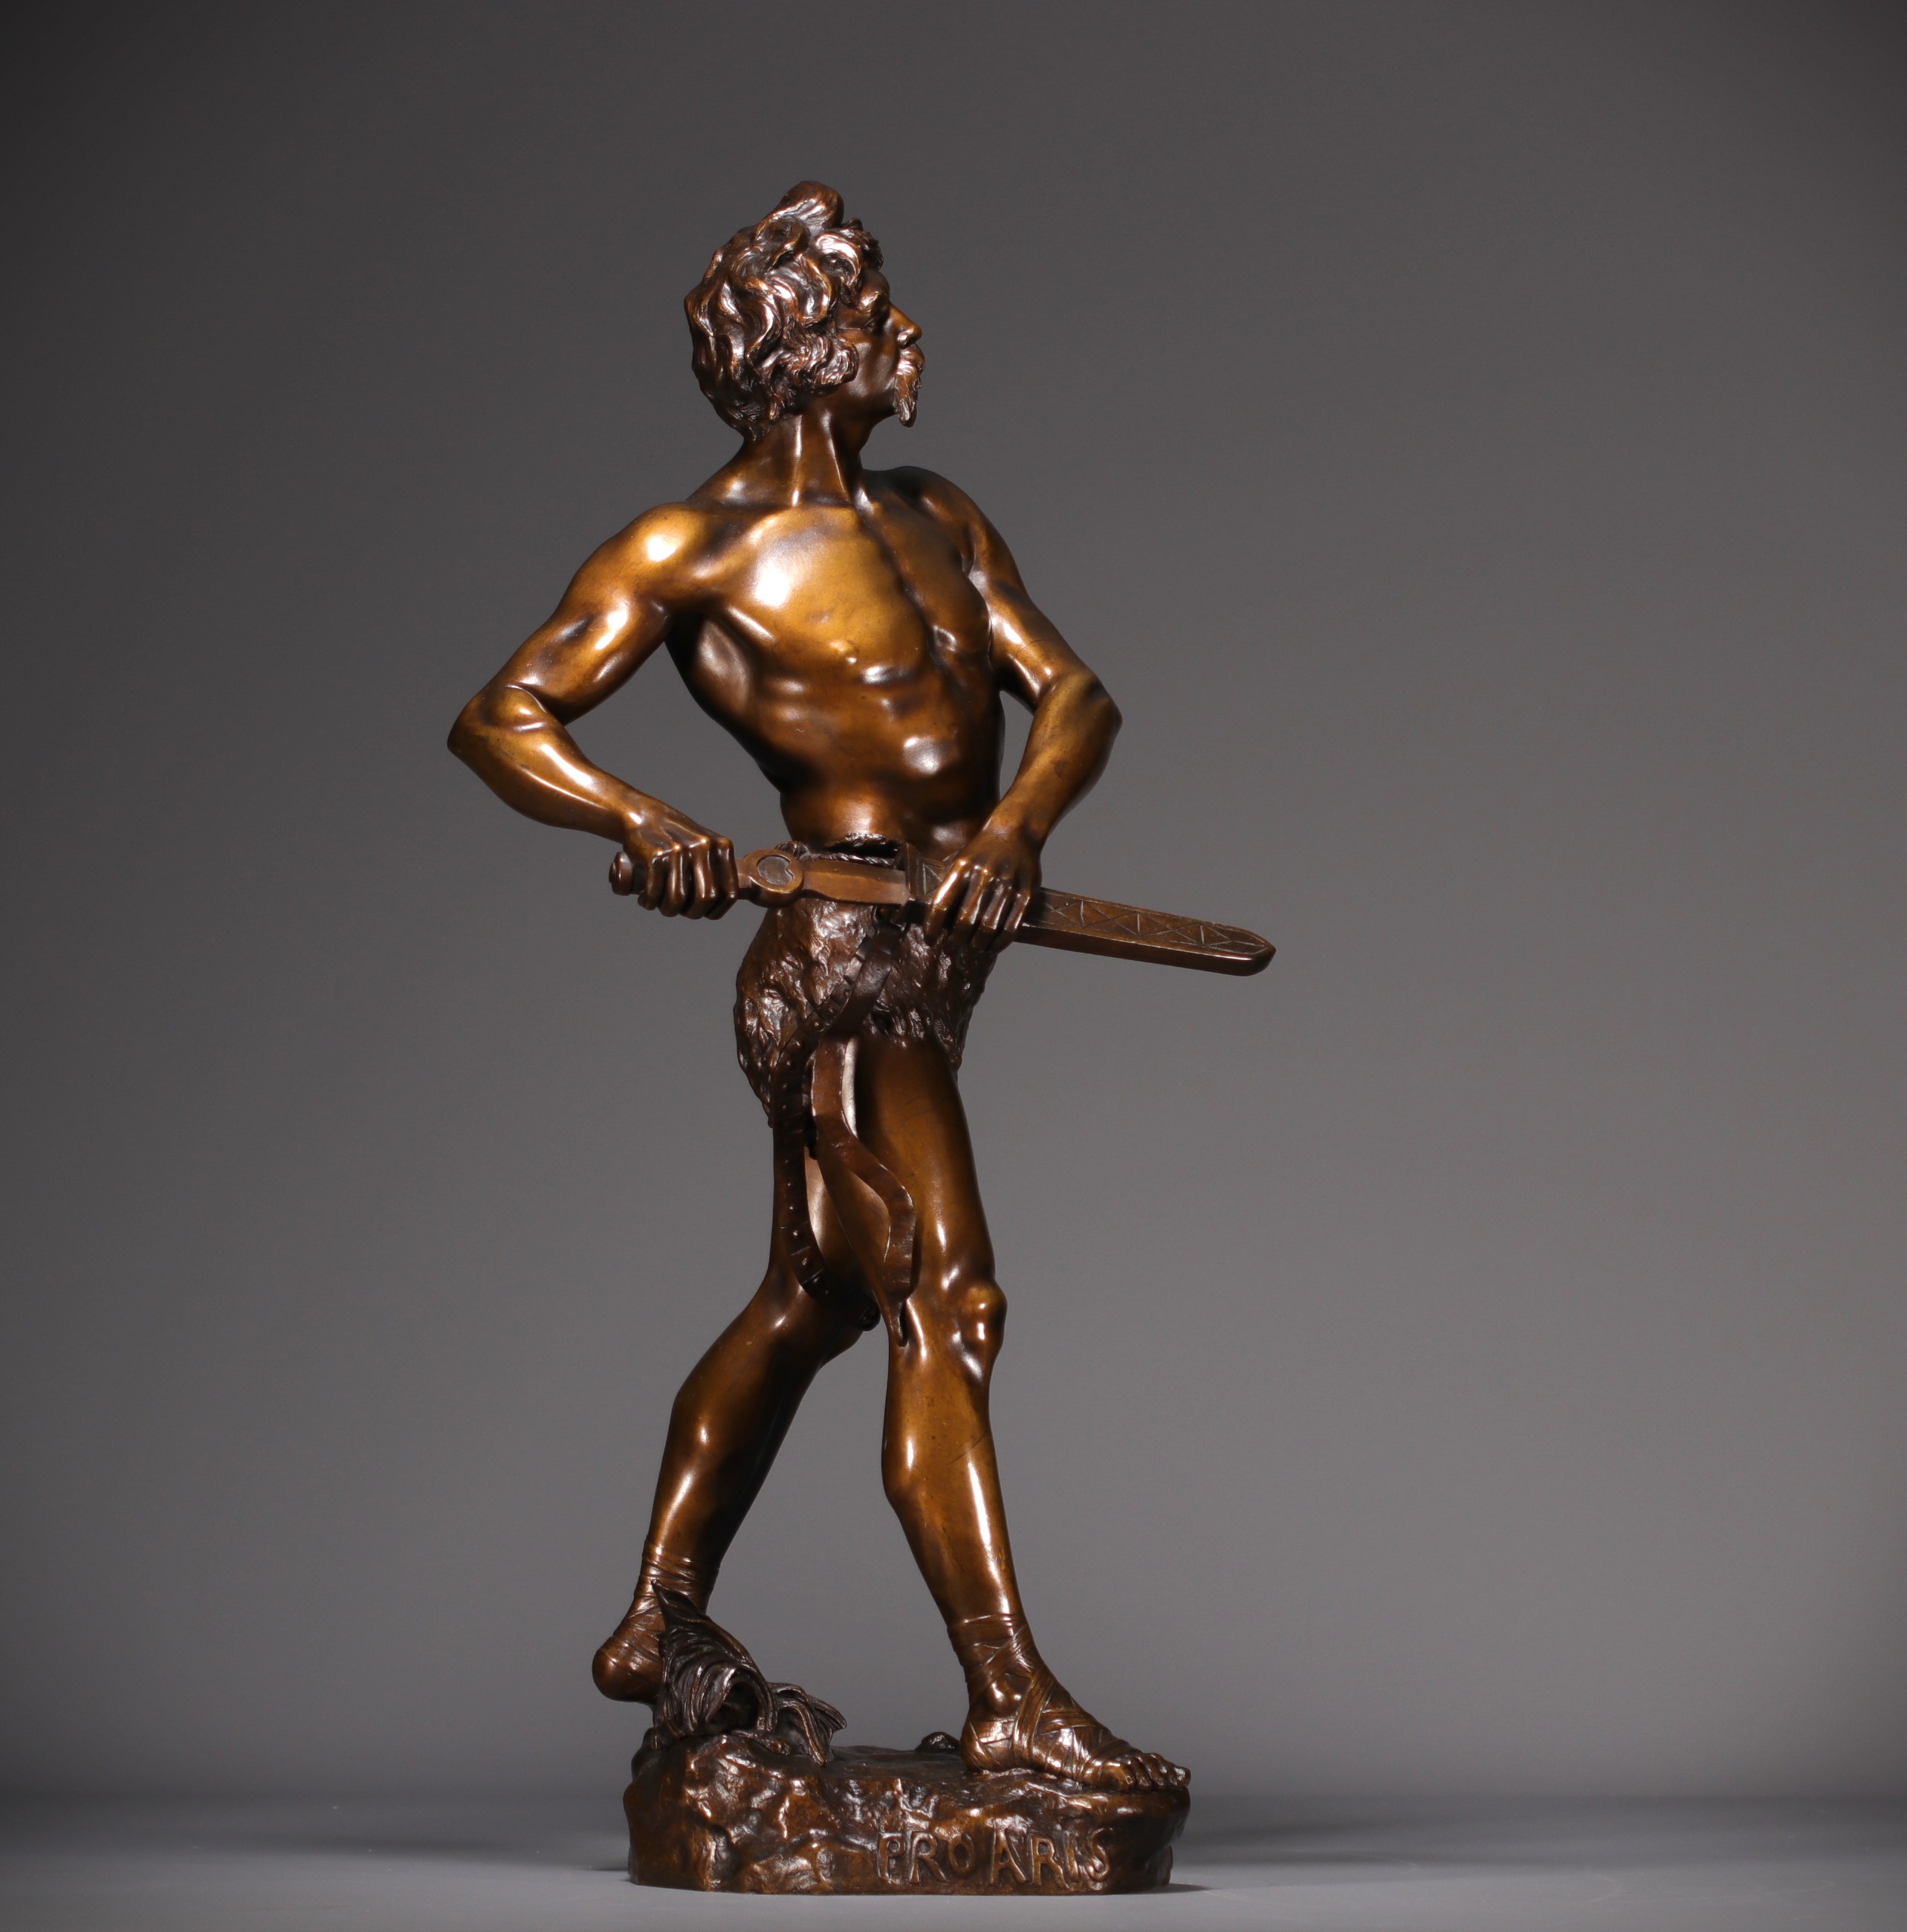 Henri FUGERE (1872-1944) "PRO ARIS ET FOCIS" Statue in bronze with shaded patina. - Image 5 of 6